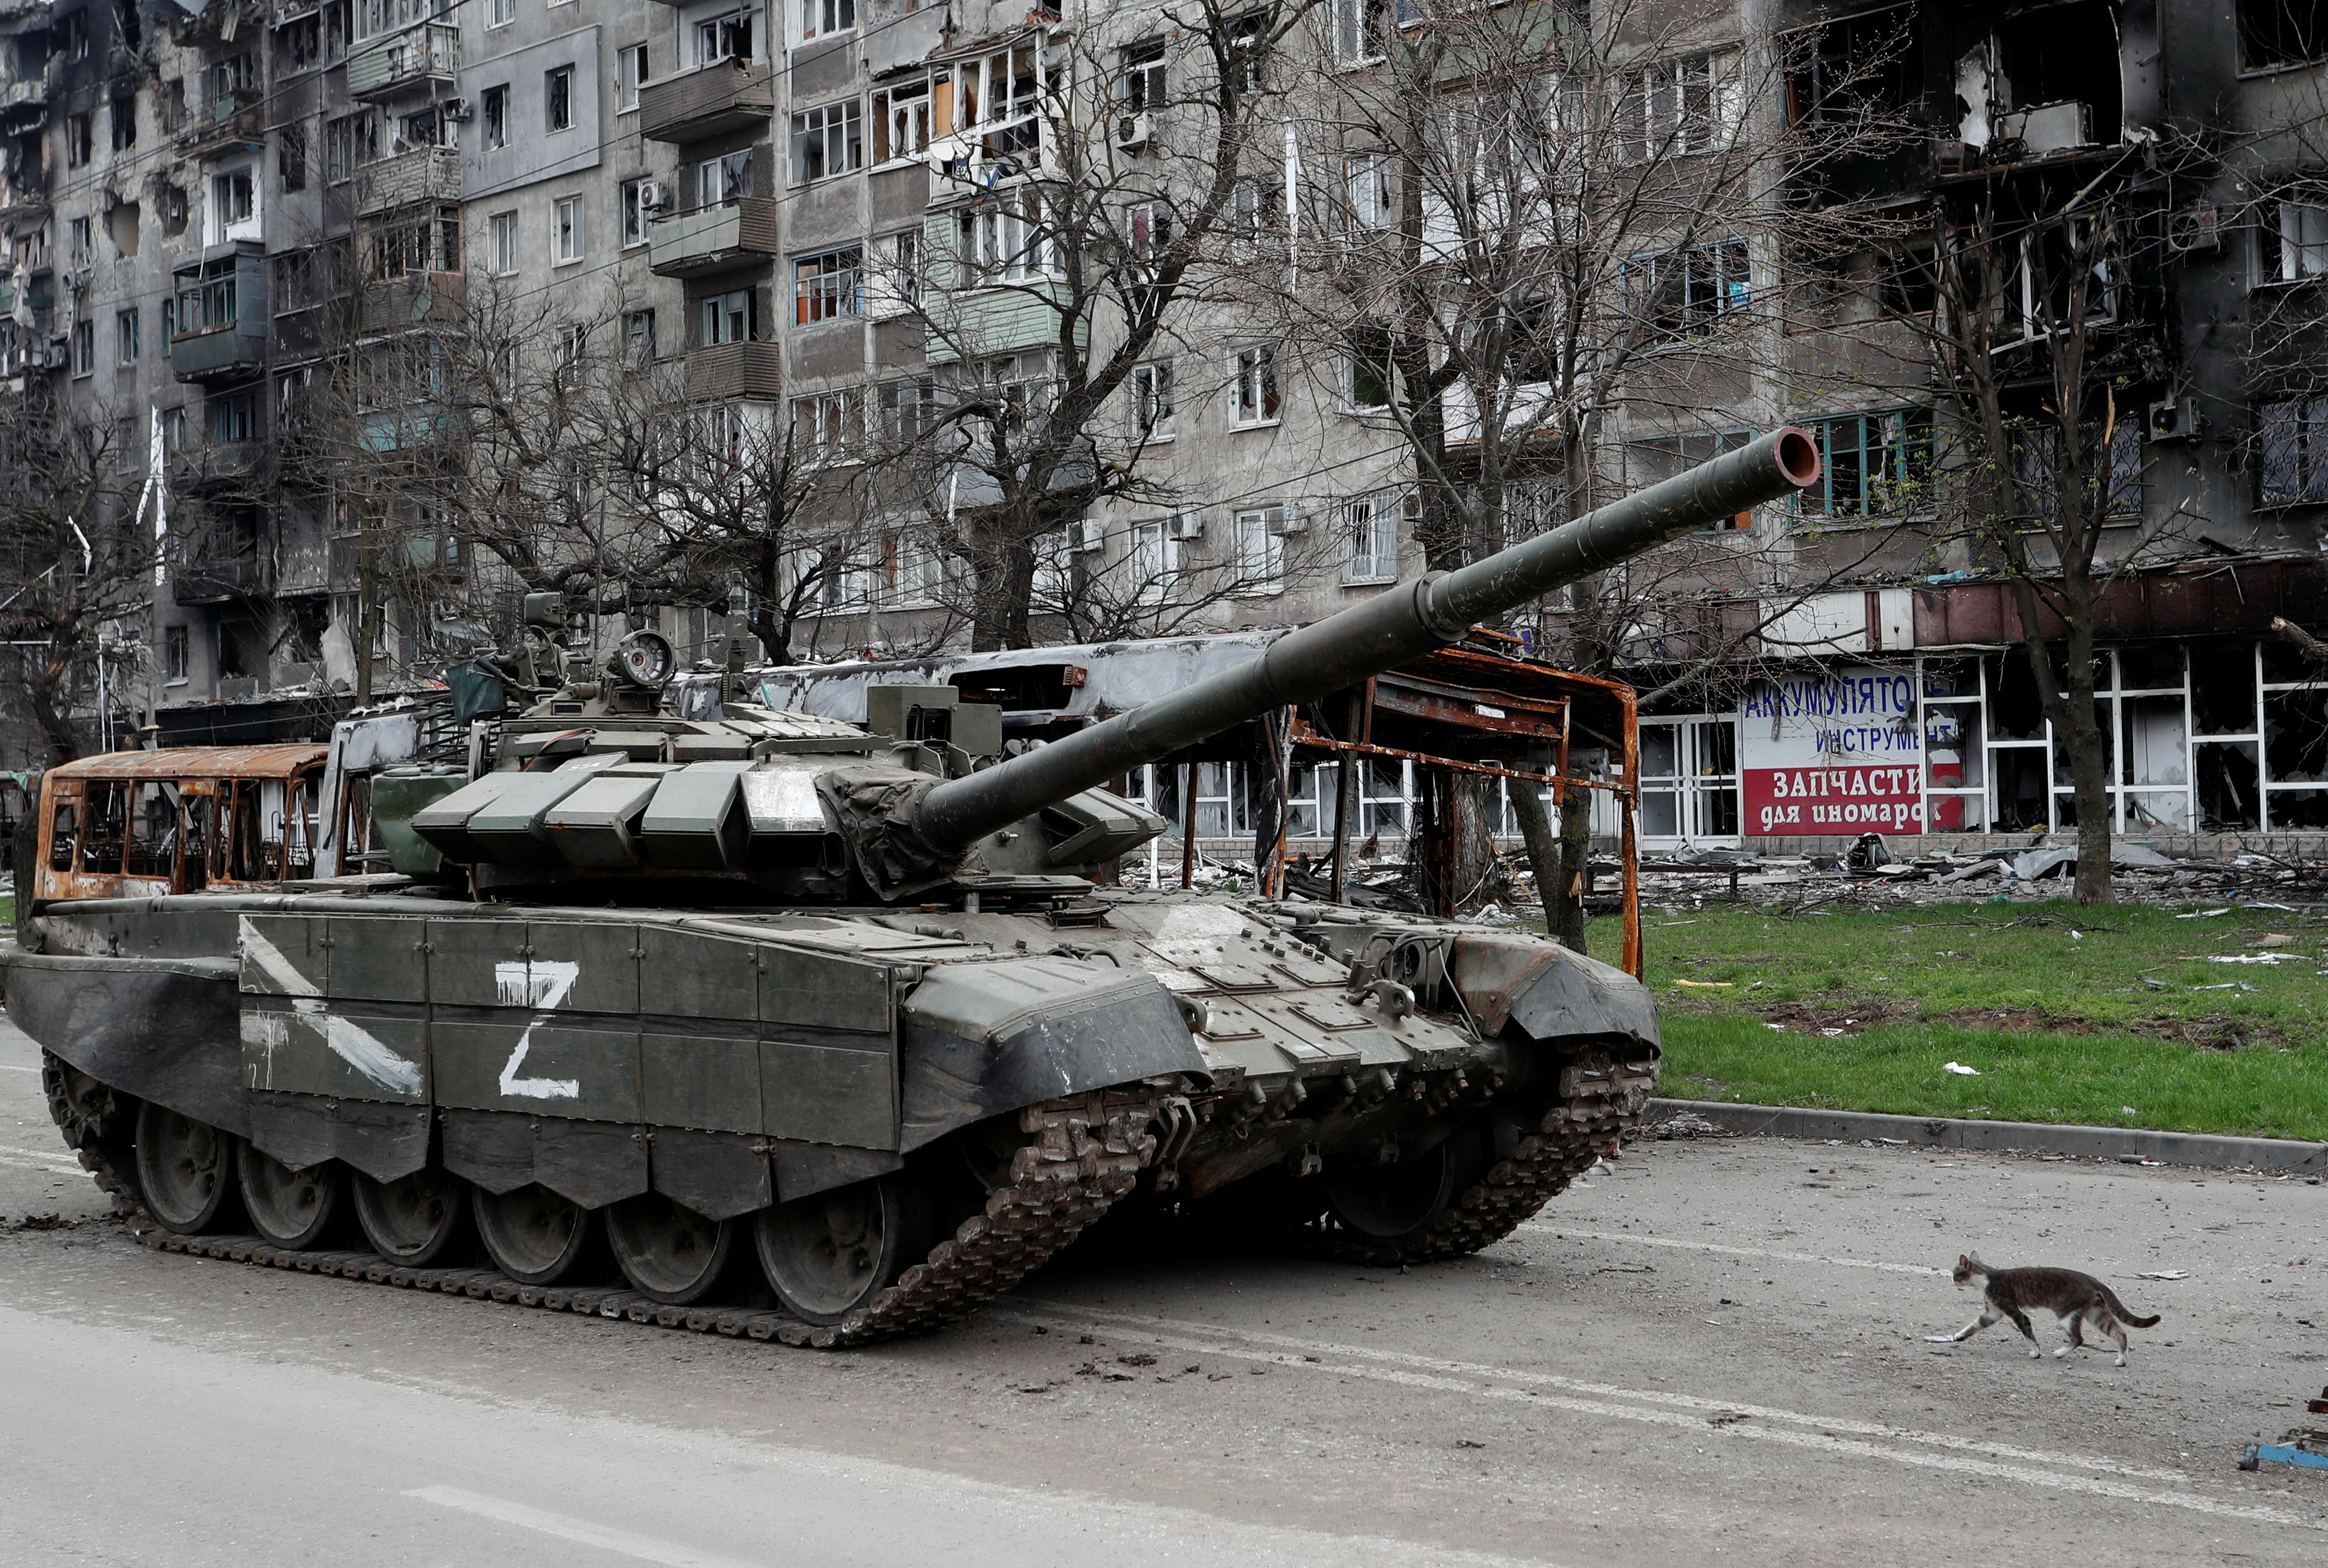 A cat walks next to a tank of pro-Russian troops in Mariupol